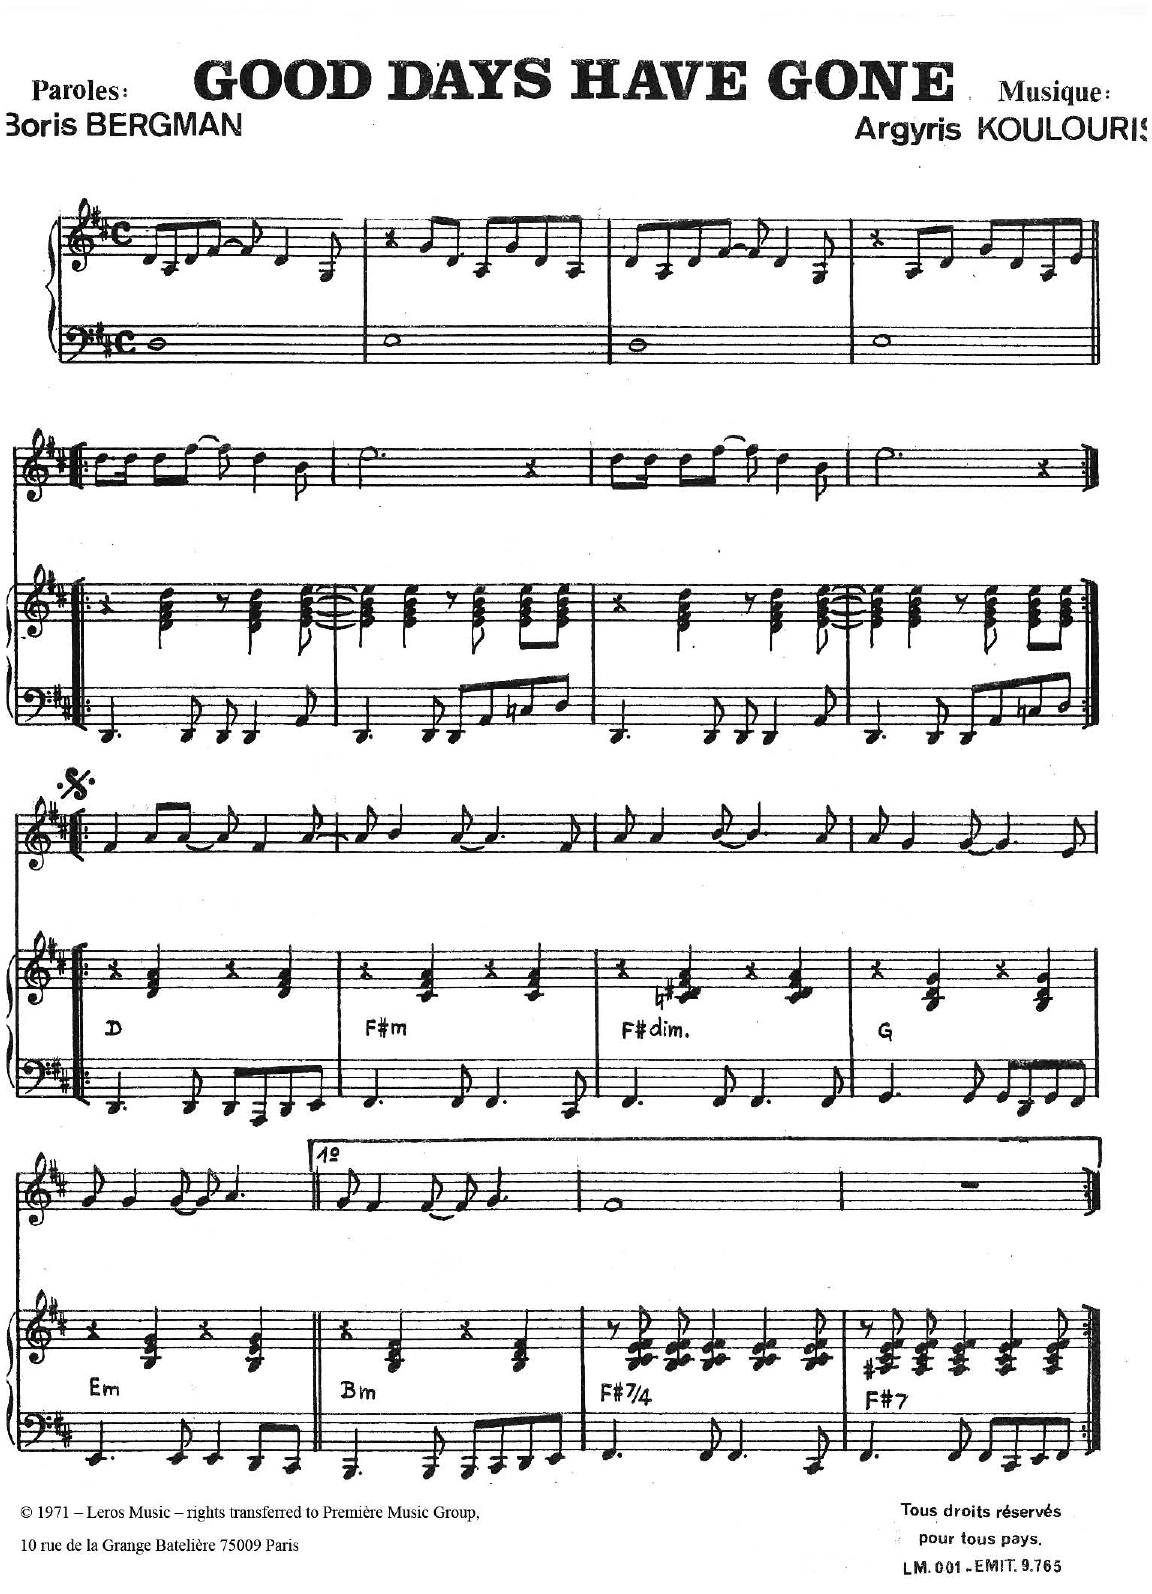 Download A Koulouris Good Days Have Gone Sheet Music